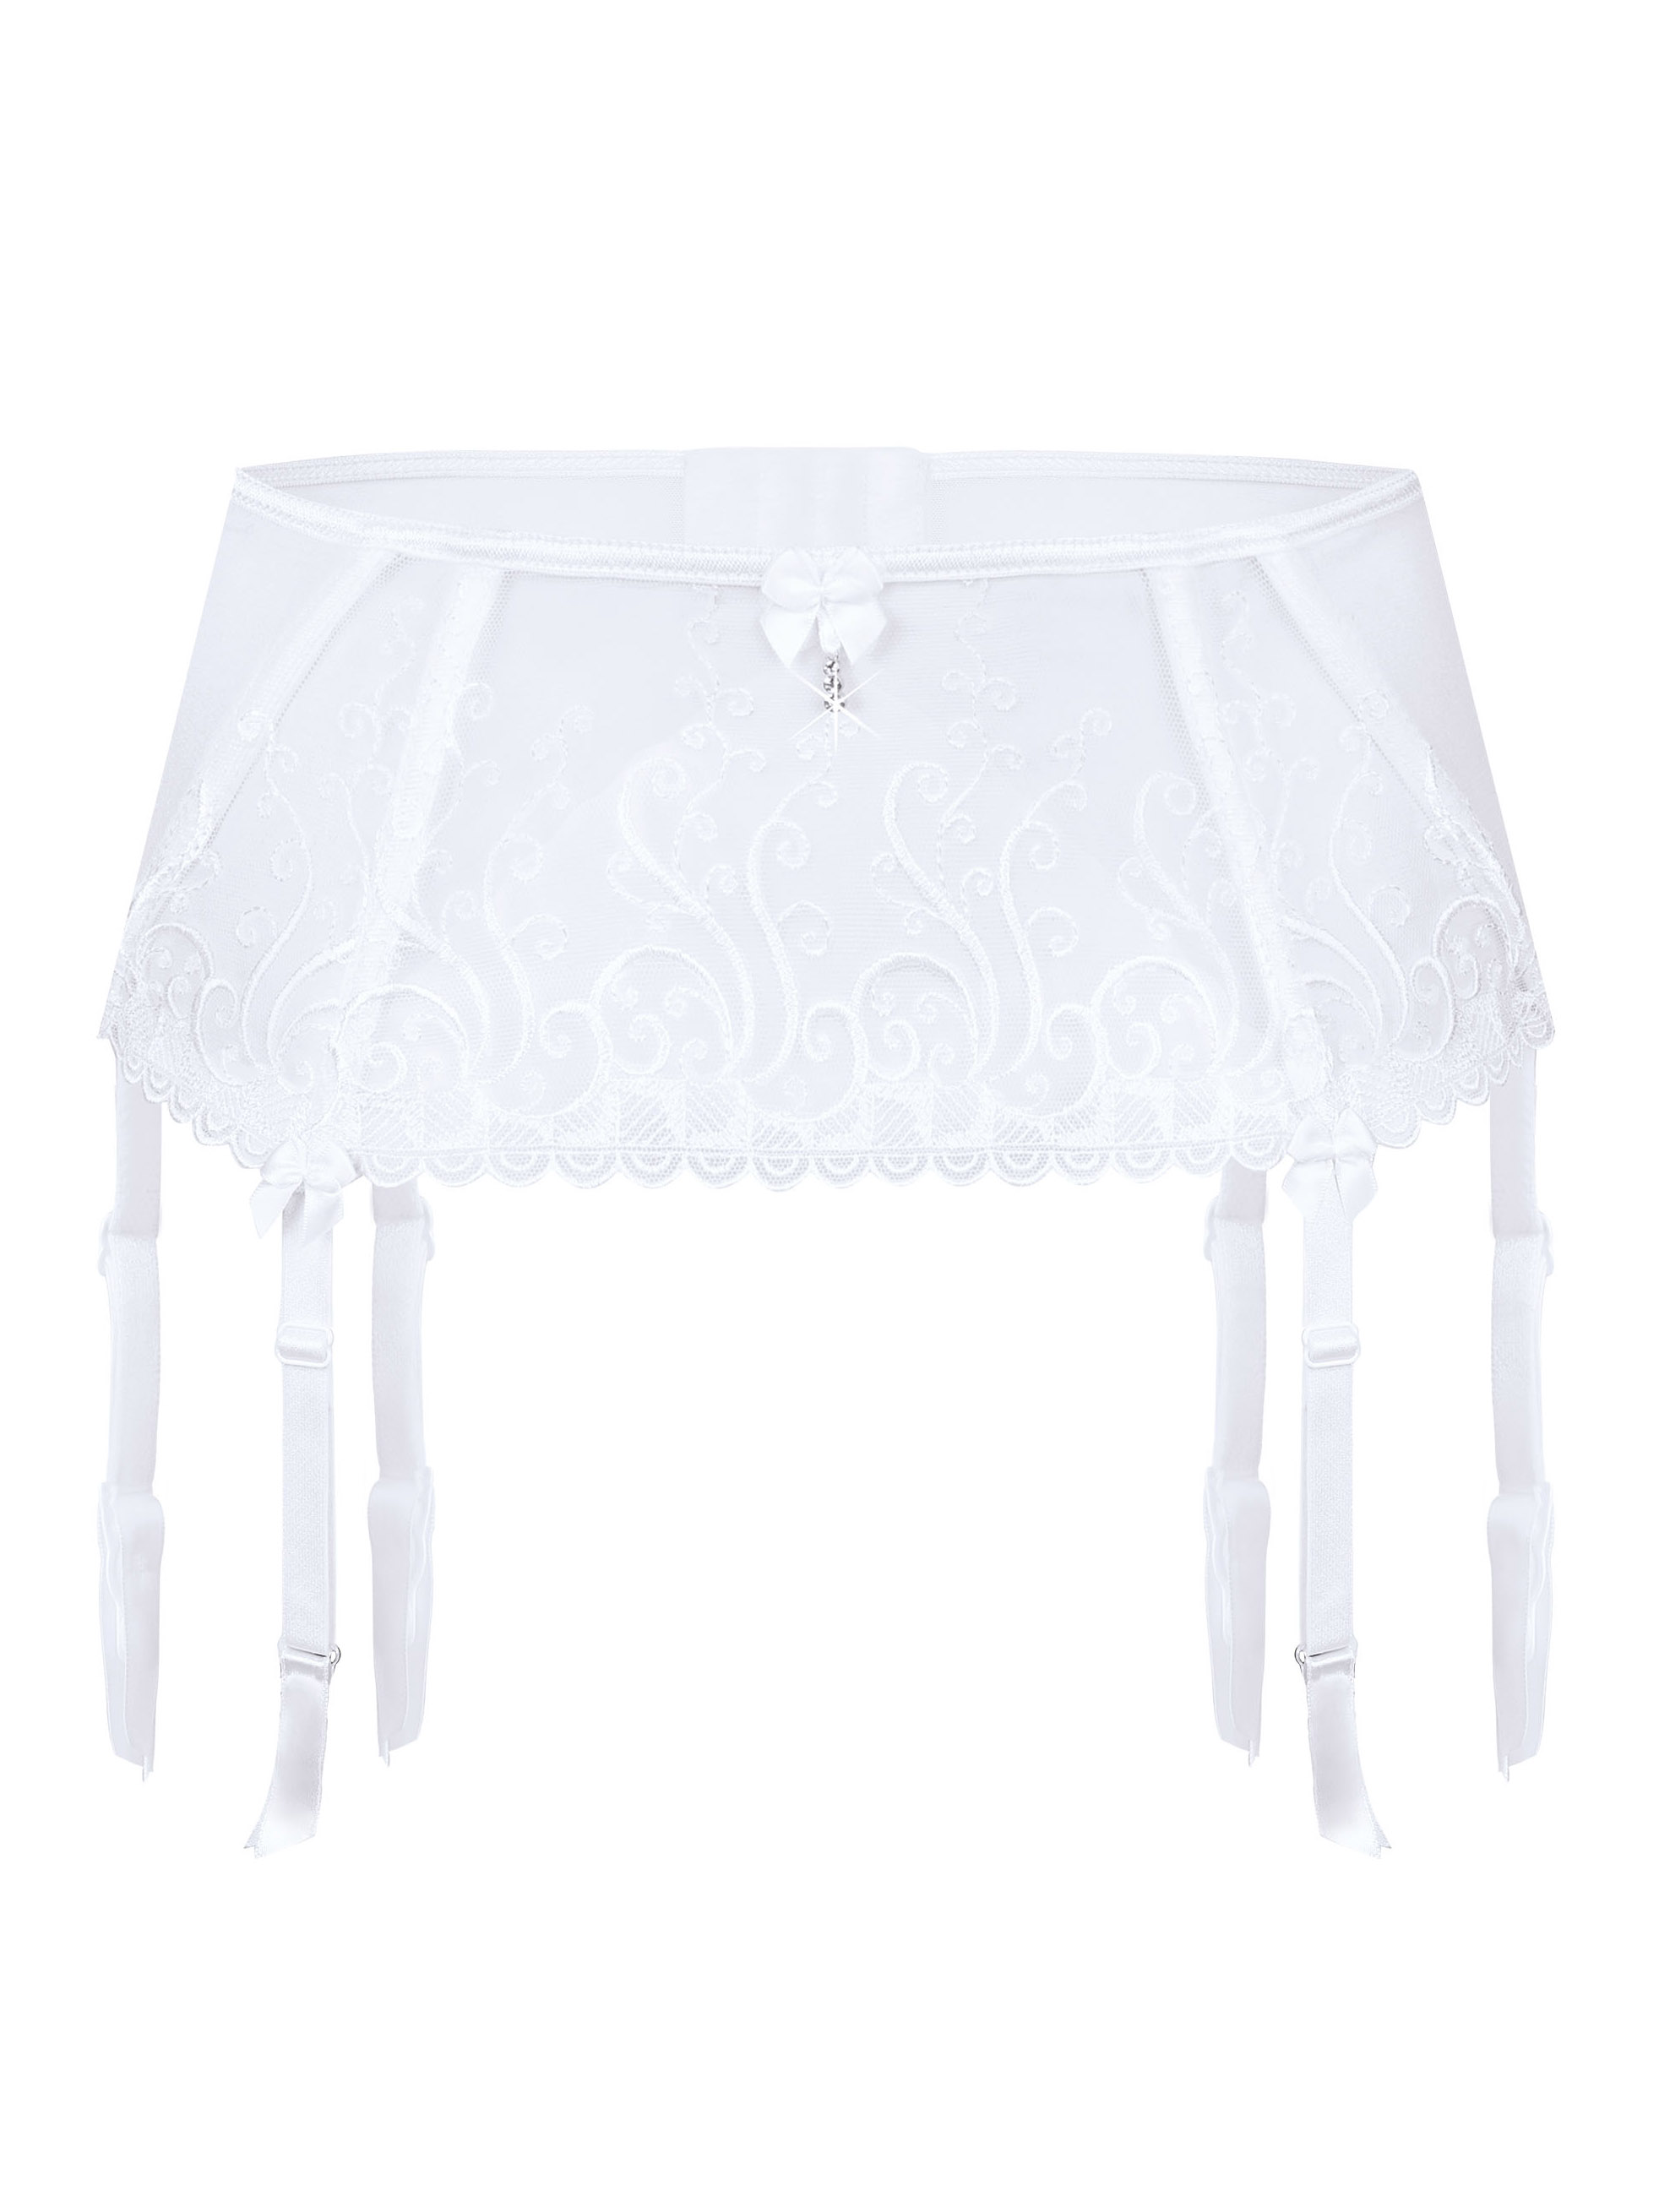 Lace garter belt with sheer tulle Roza Anuk #6